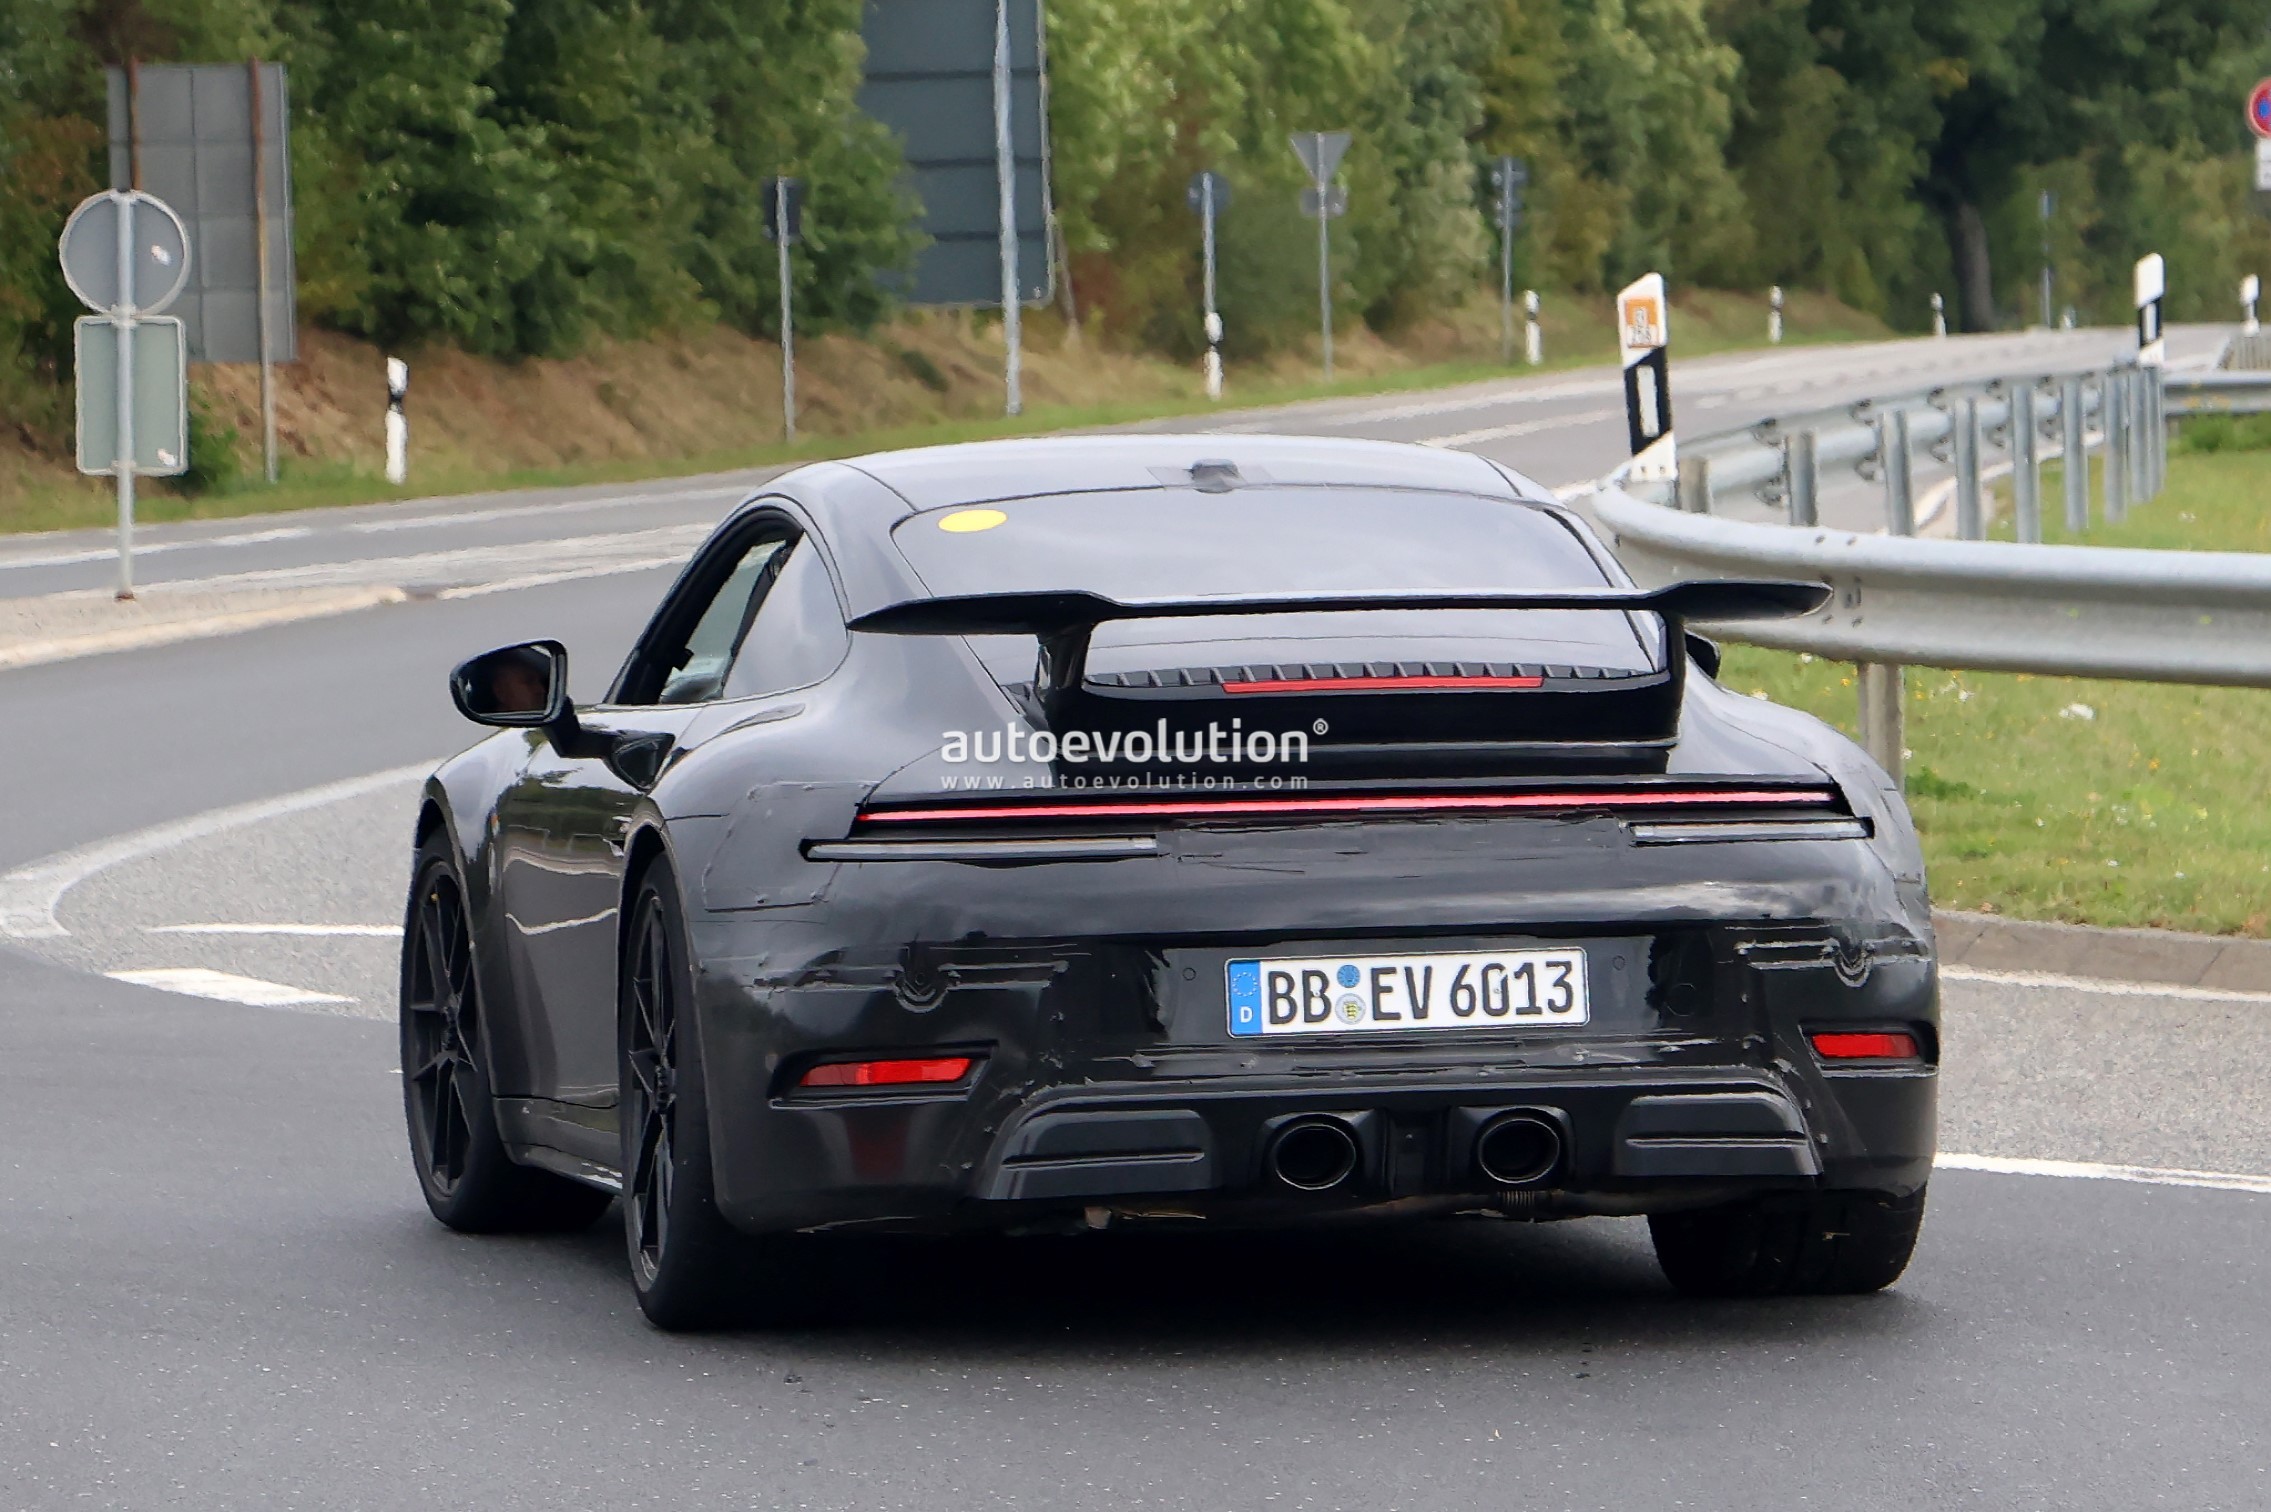 https://s1.cdn.autoevolution.com/images/news/gallery/2025-porsche-911-engine-options-allegedly-include-new-36-liter-naturally-aspirated-boxer_17.jpg